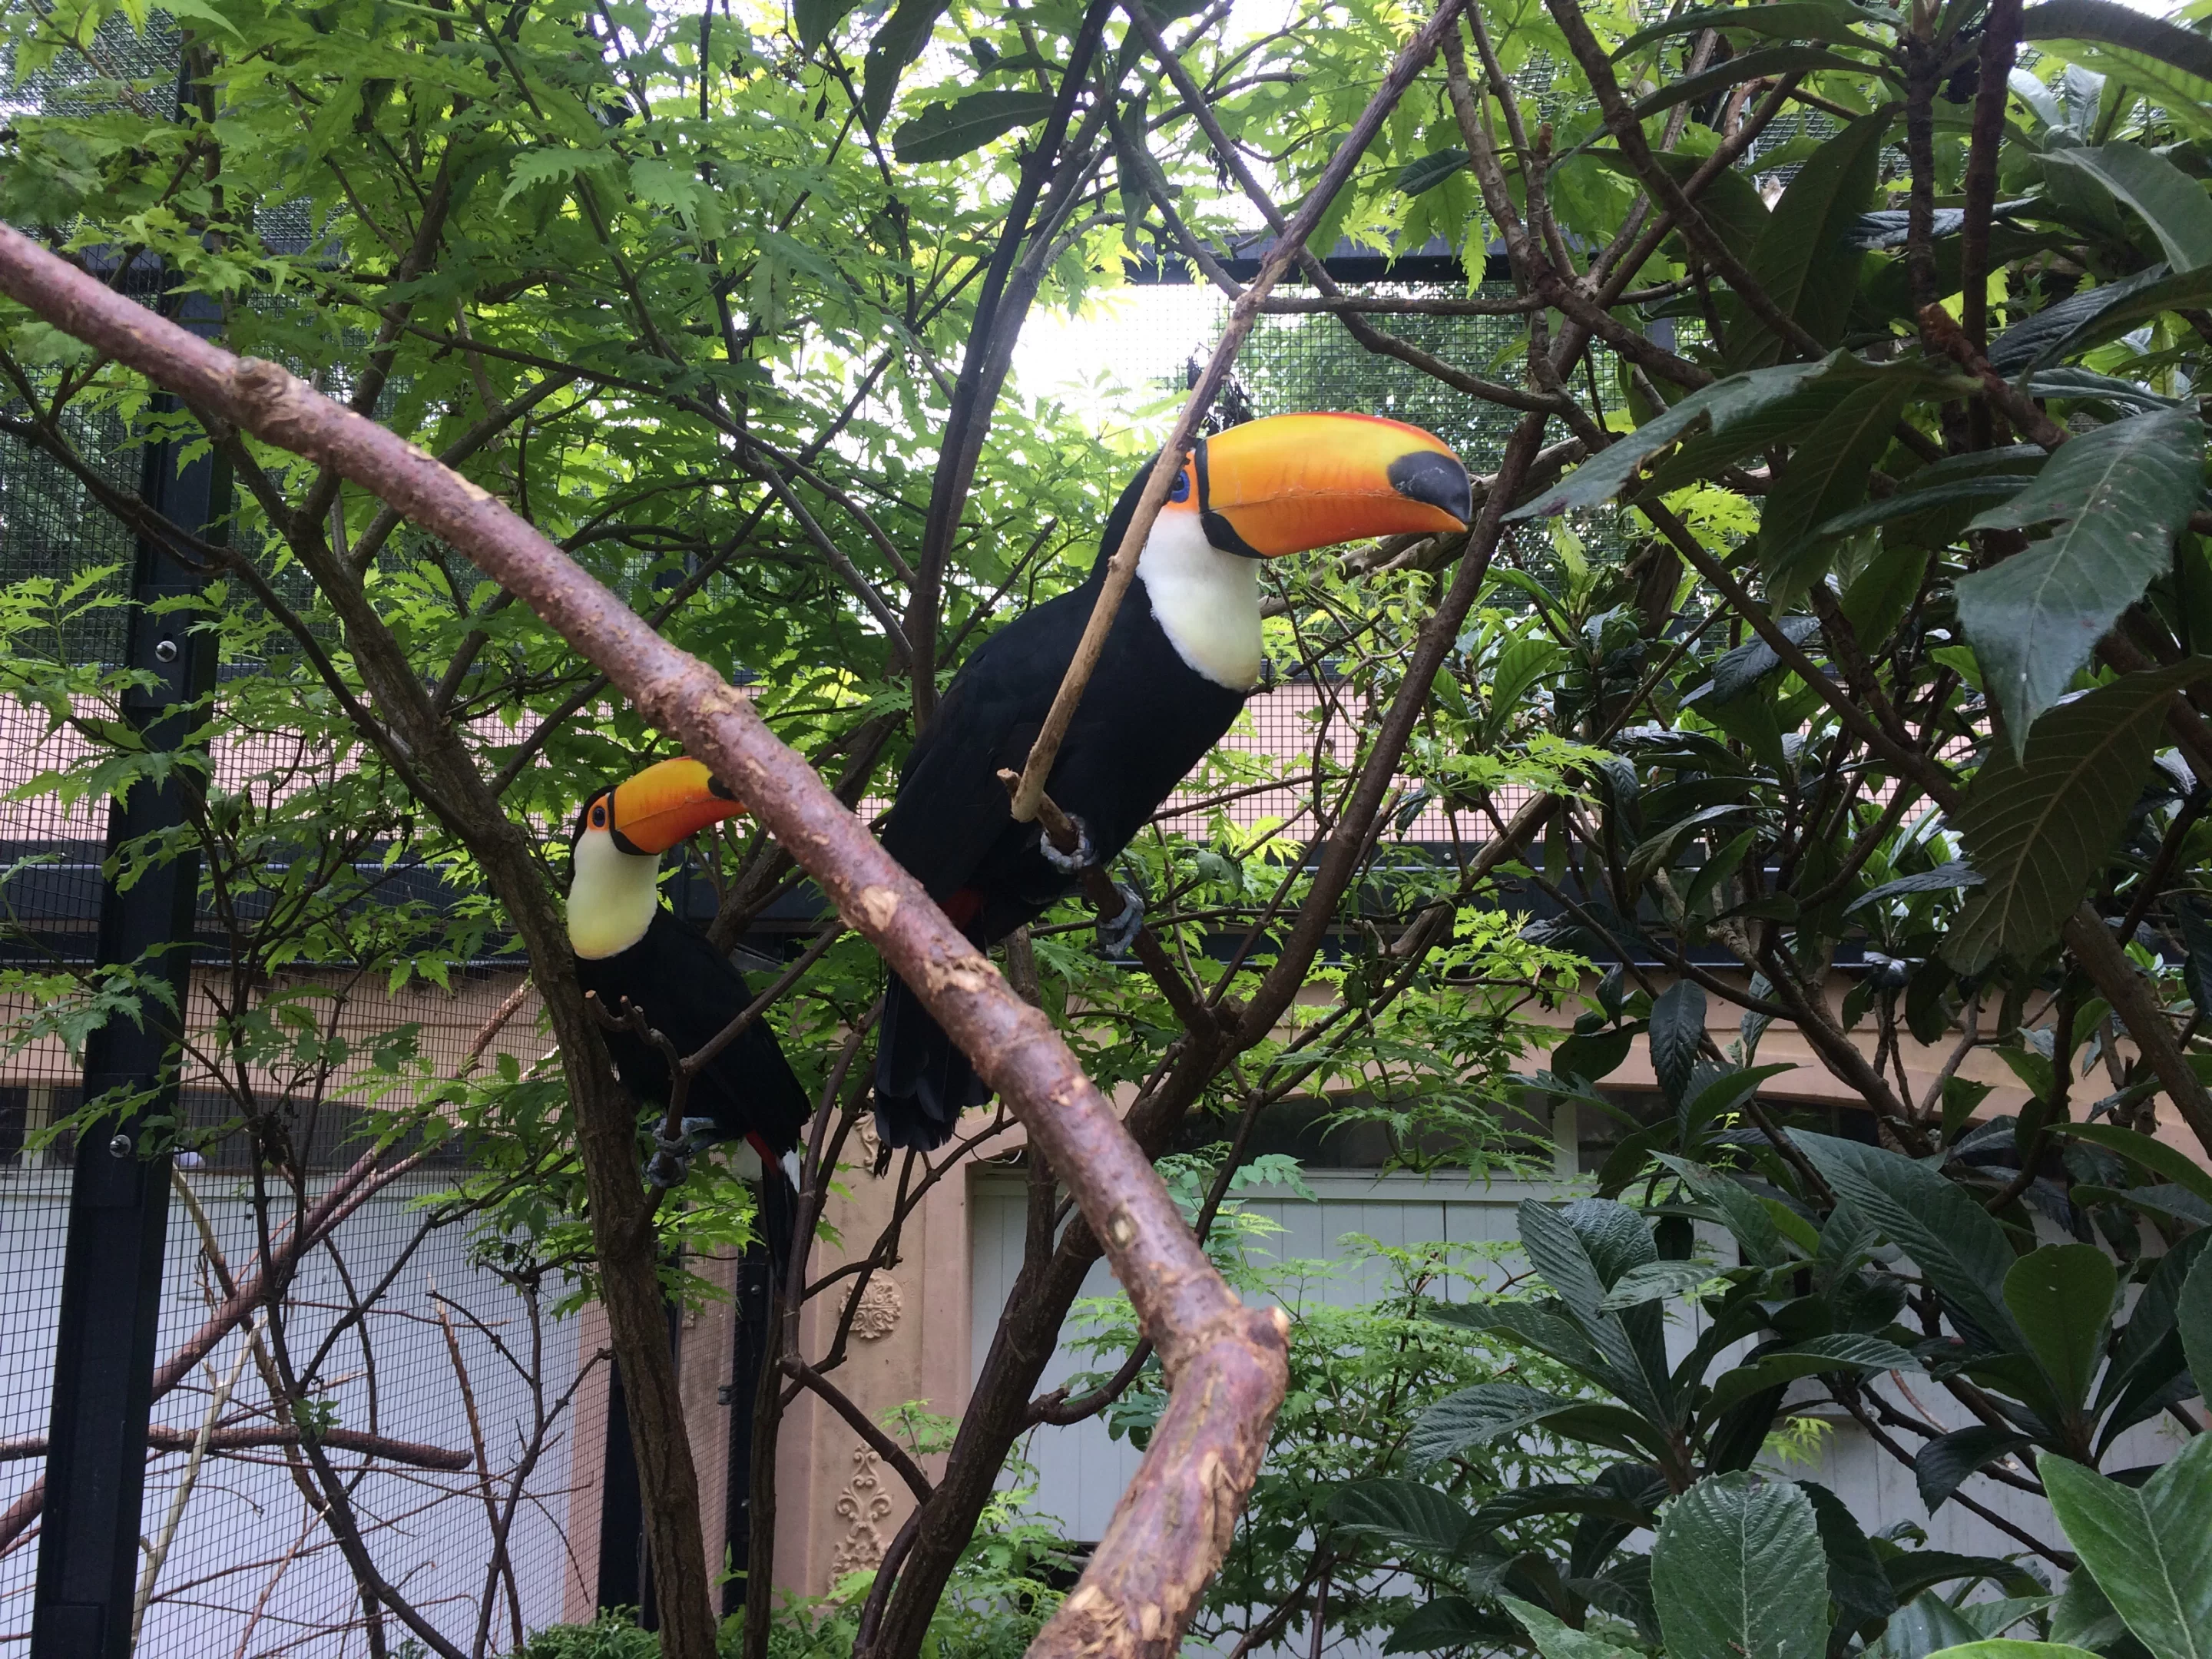 Enjoy a day of learning and fun that supports wildlife conservation at the Toucan Rescue Ranch!